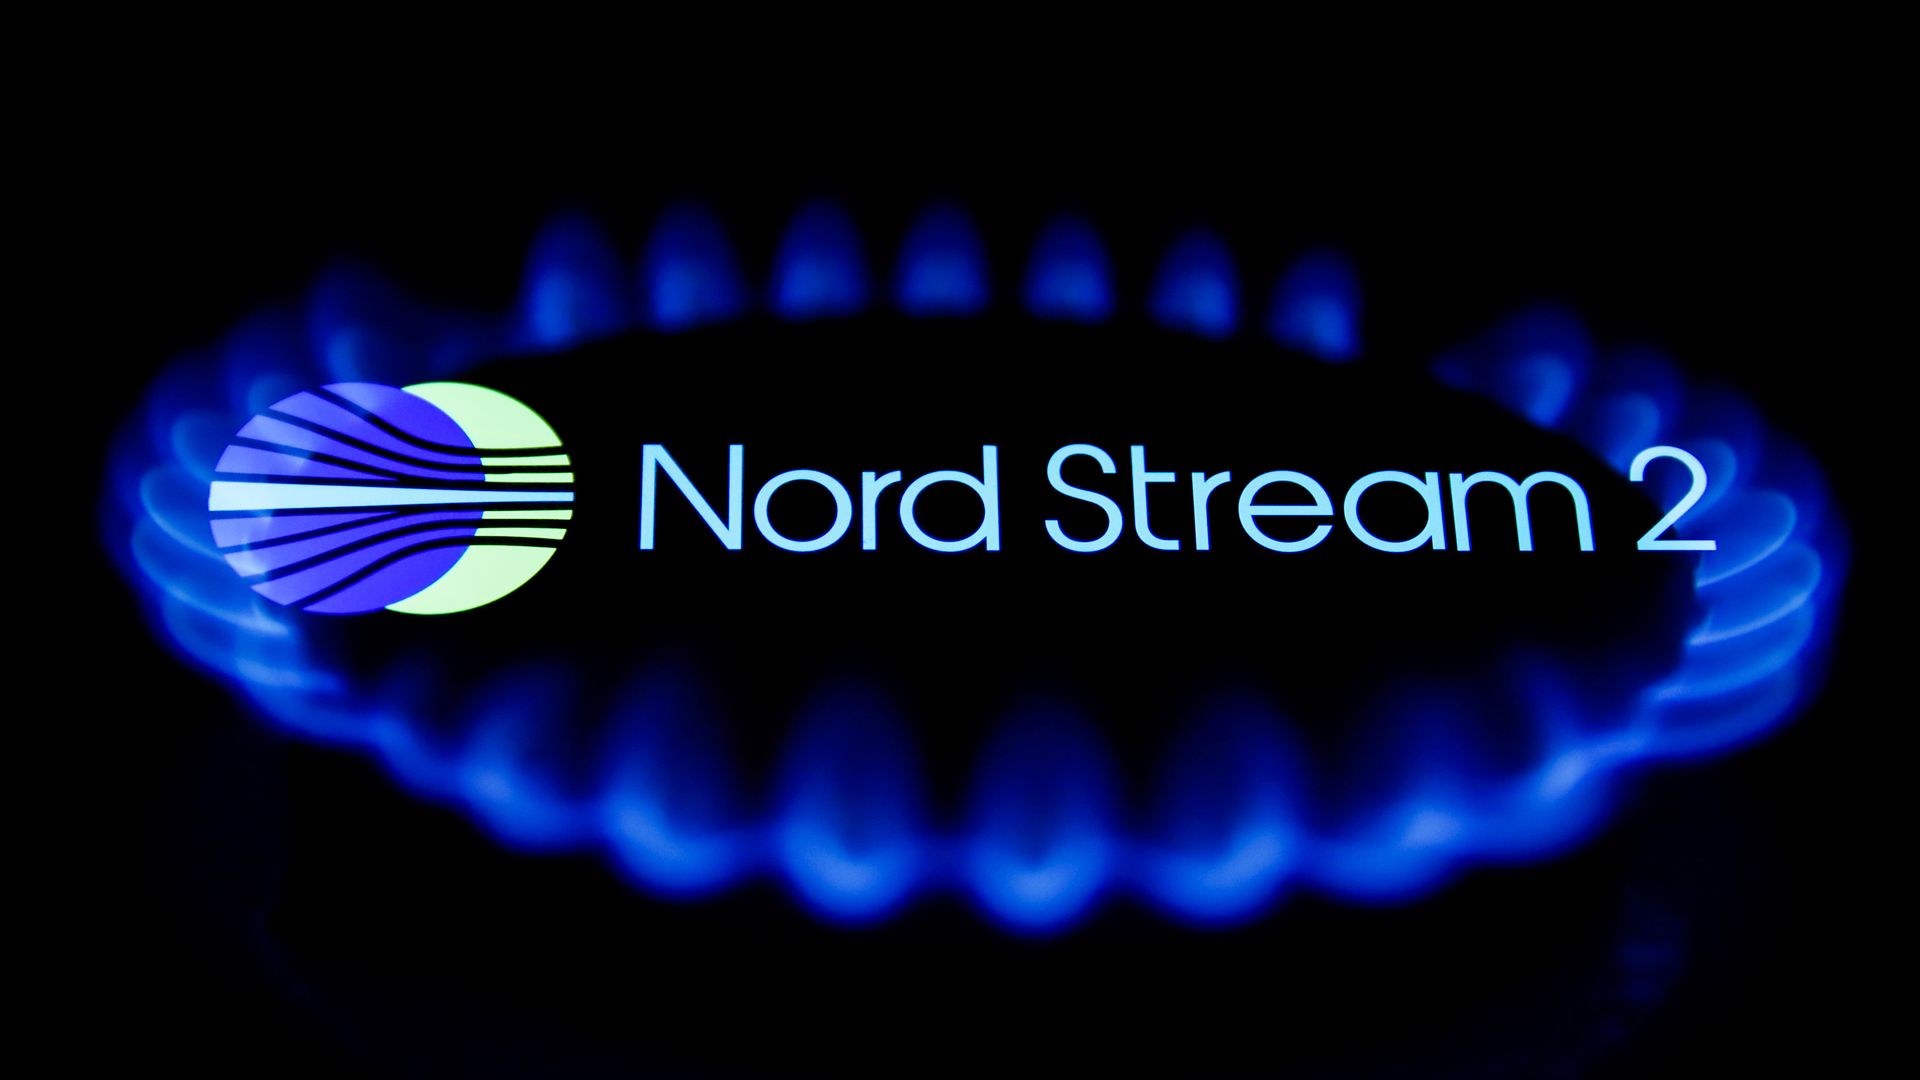 The Nord Stream 2 gas pipeline logo